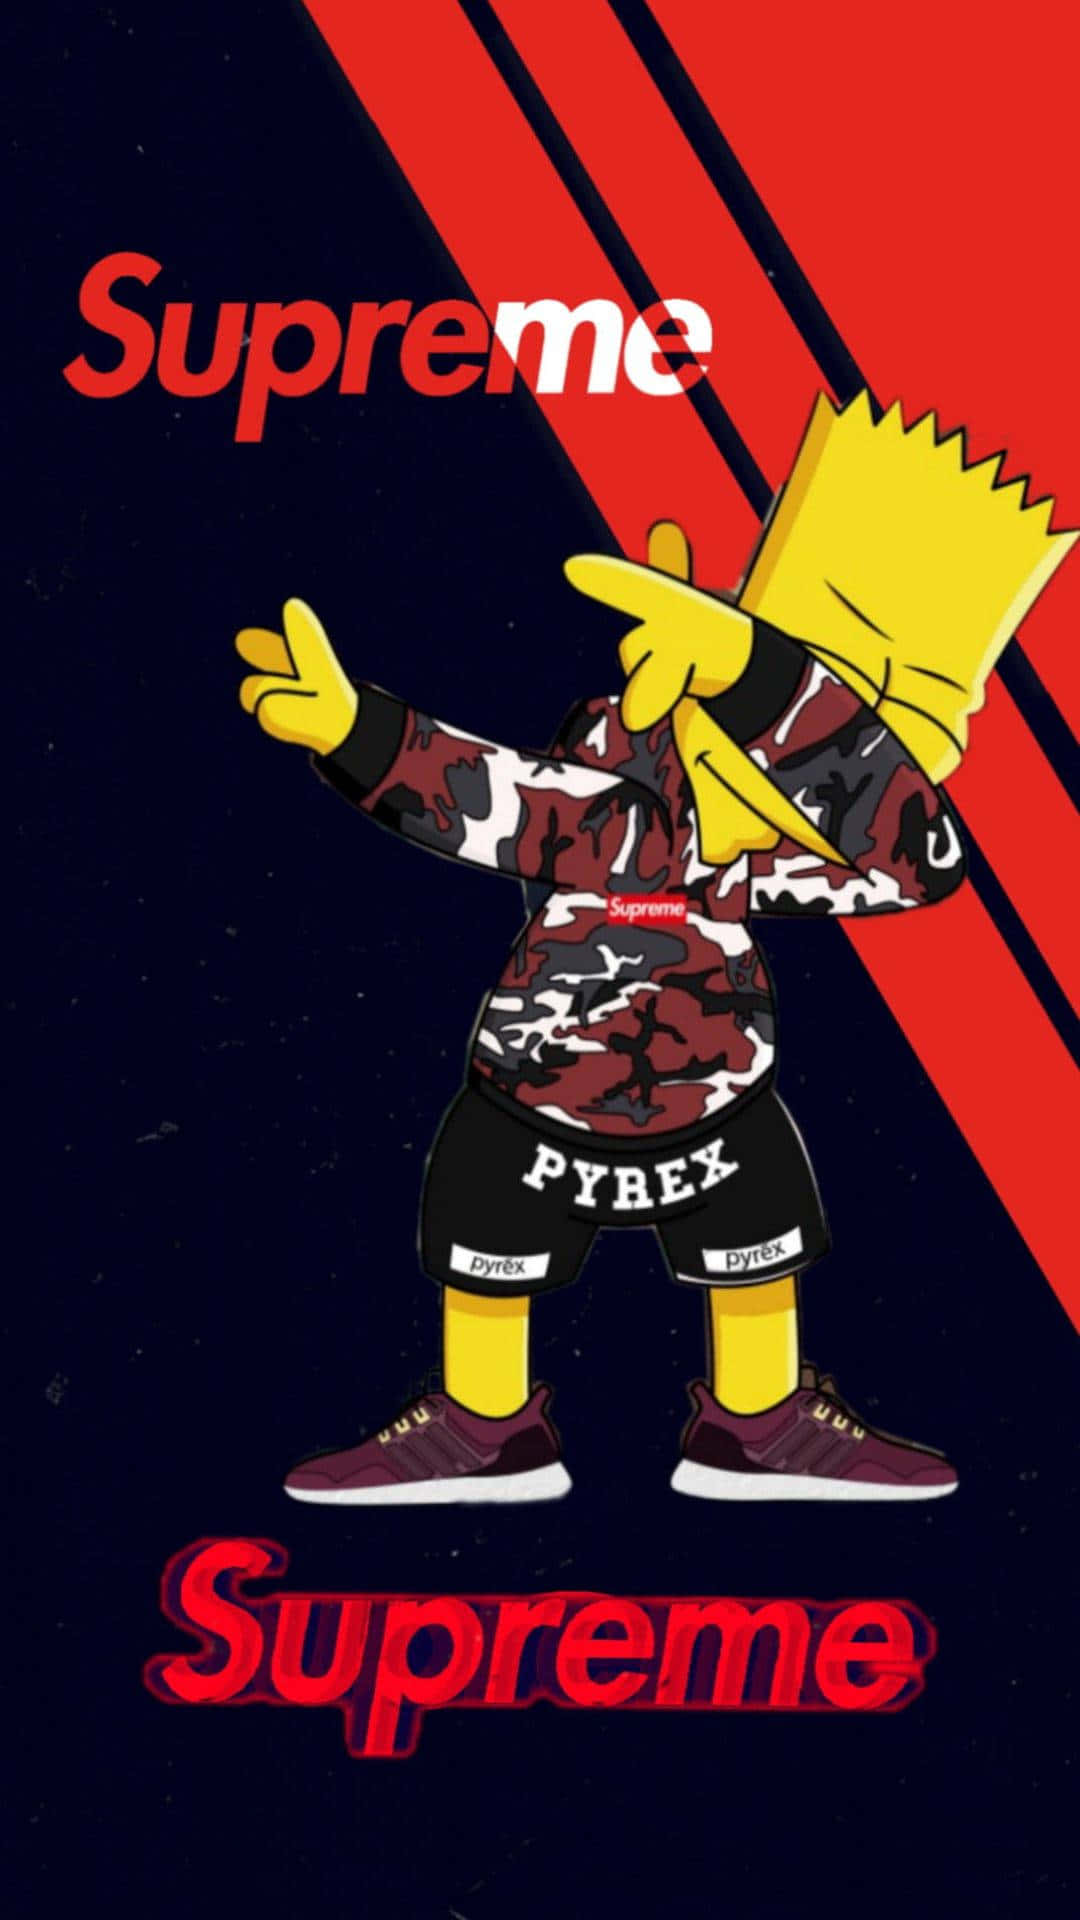 Cool supreme bart simpson Wallpapers Download